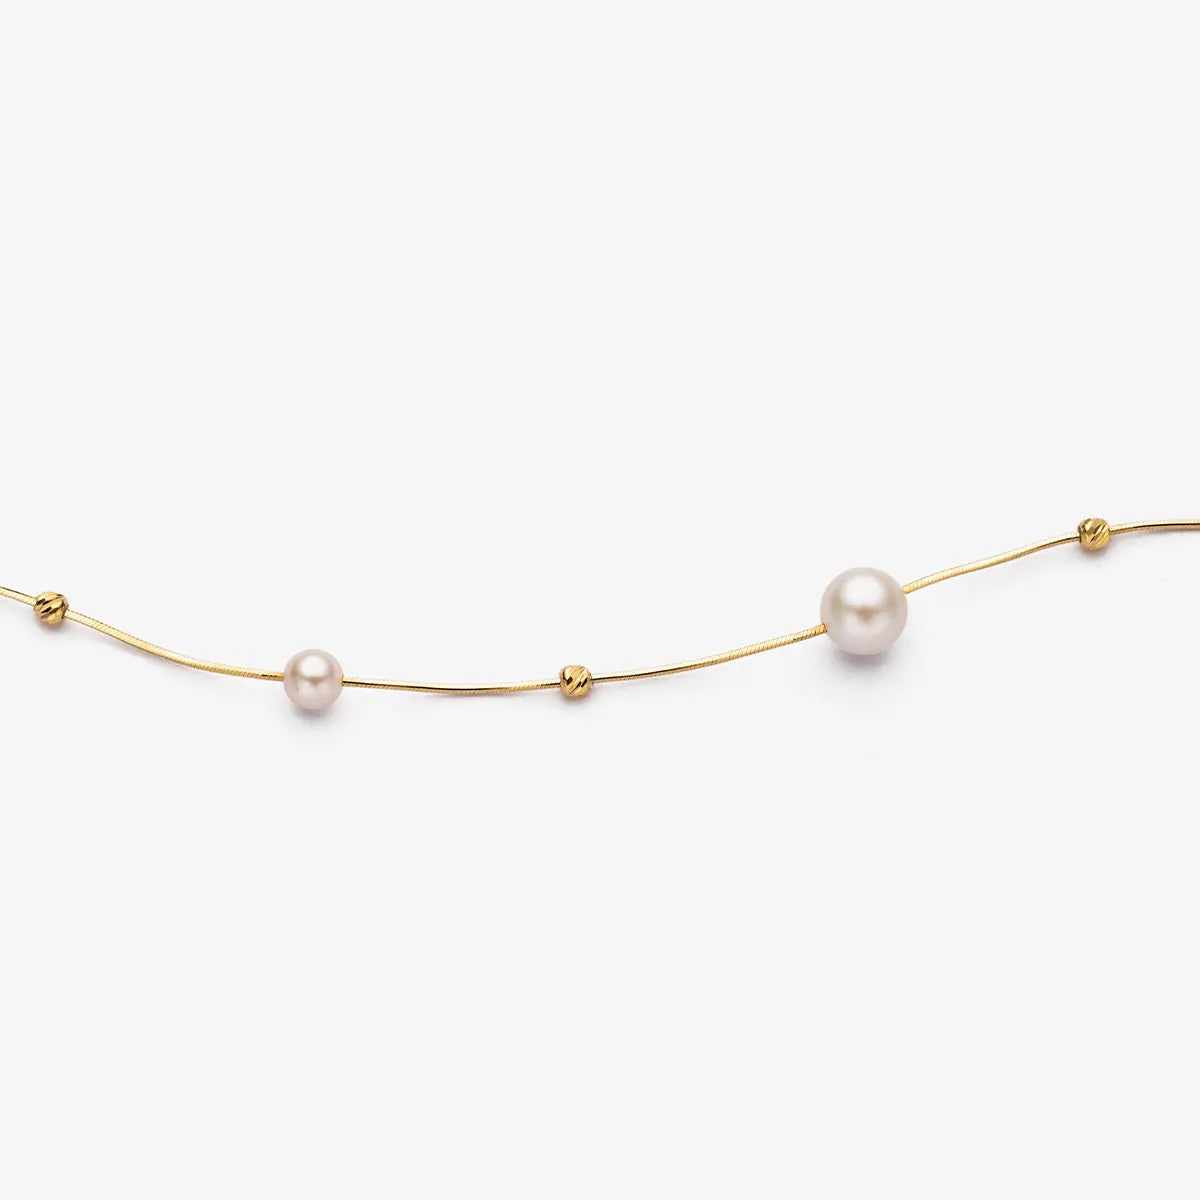 FINE LINE COLLECTION Akoya Saltwater Pearls 18k Yellow Gold Baby'S Breath Herringbone Chain Necklace